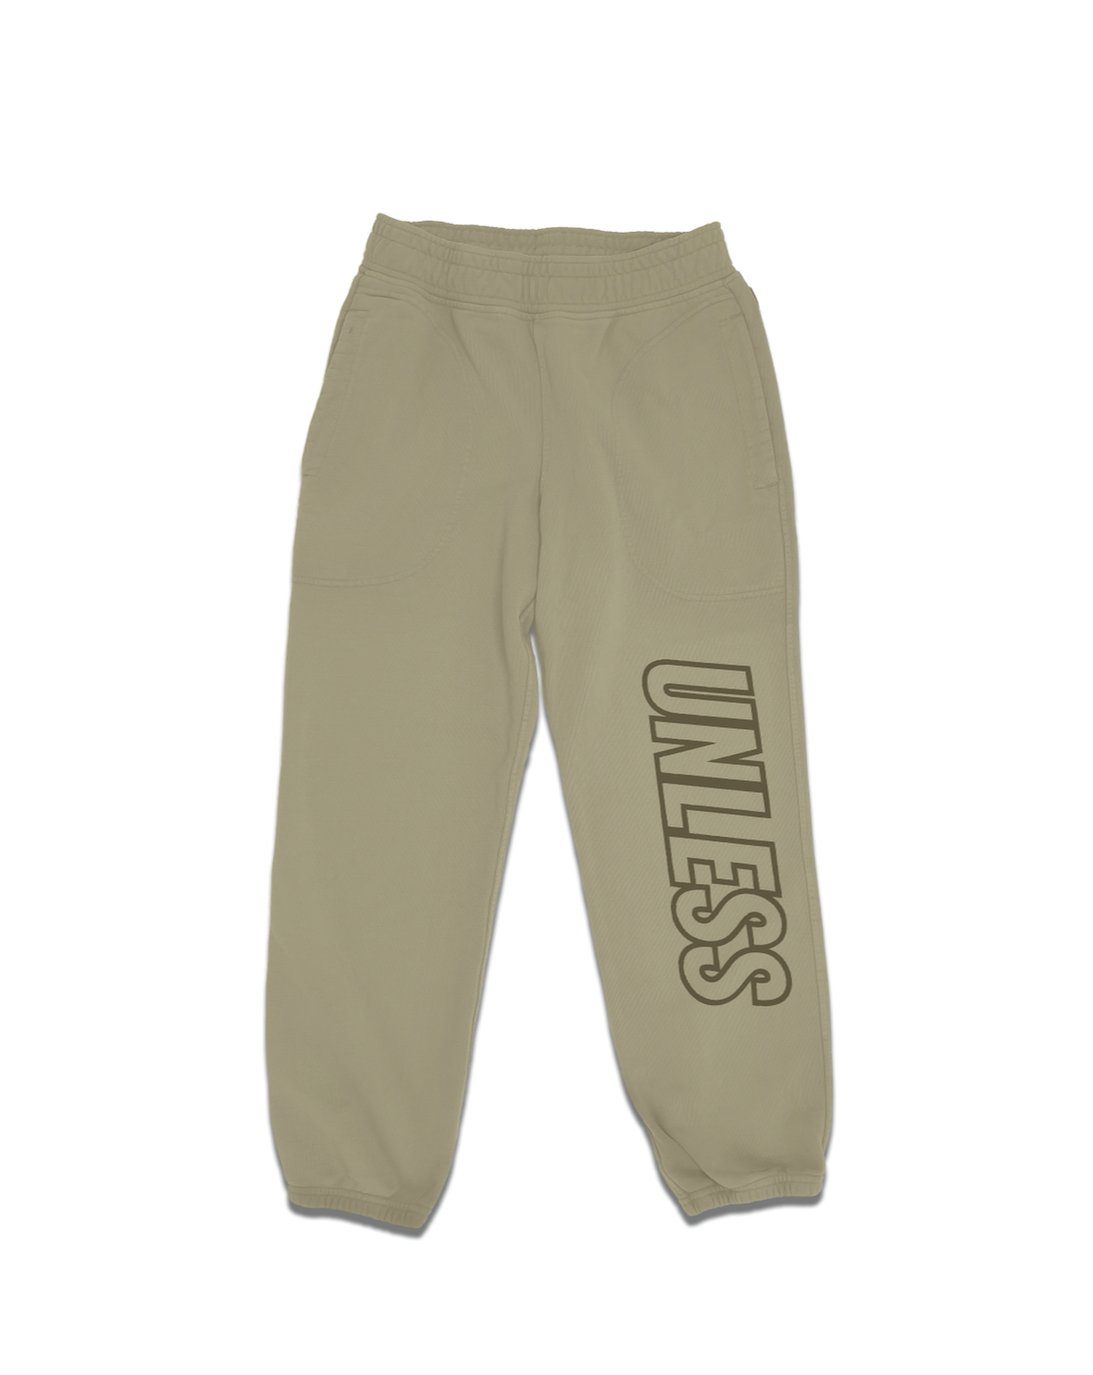 "UNLESS" Biodegradable Terry Pant